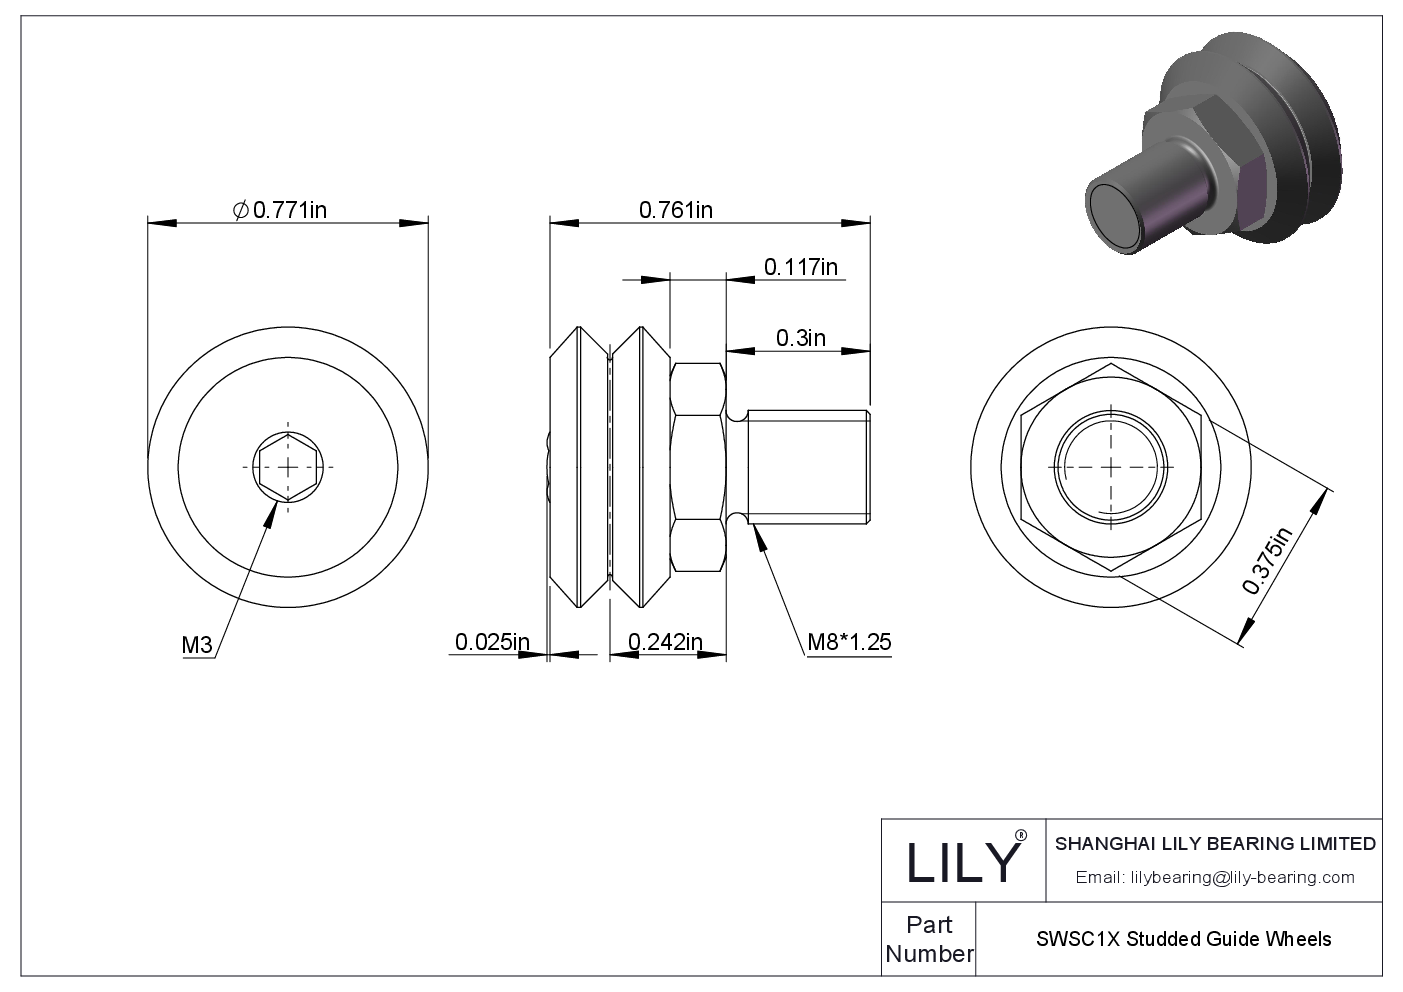 SWSC1X Studded Guide Wheels cad drawing